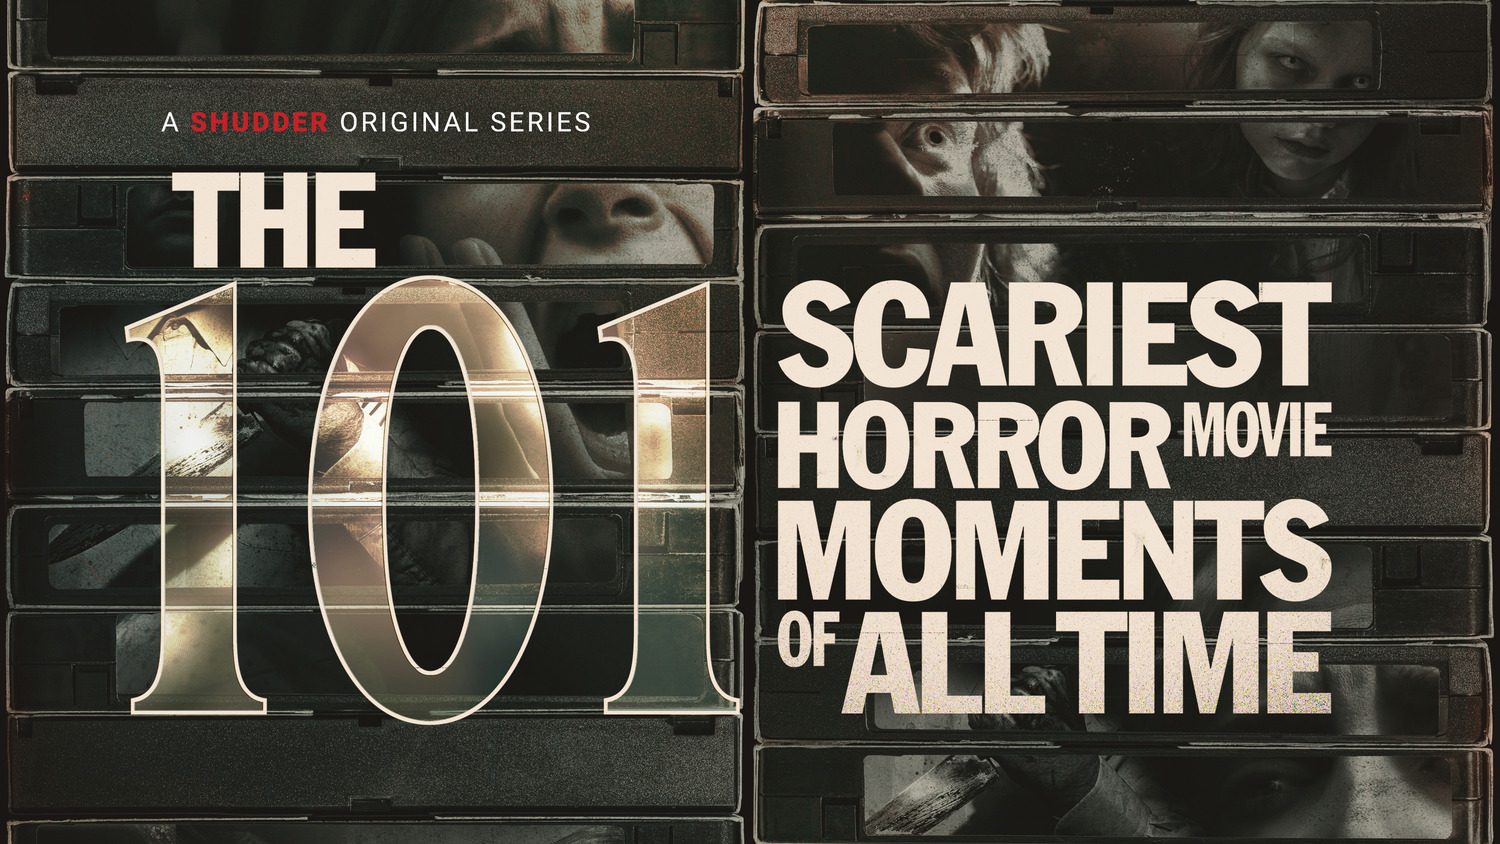 Extra Large TV Poster Image for The 101 Scariest Horror Movie Moments of All Time (#2 of 2)